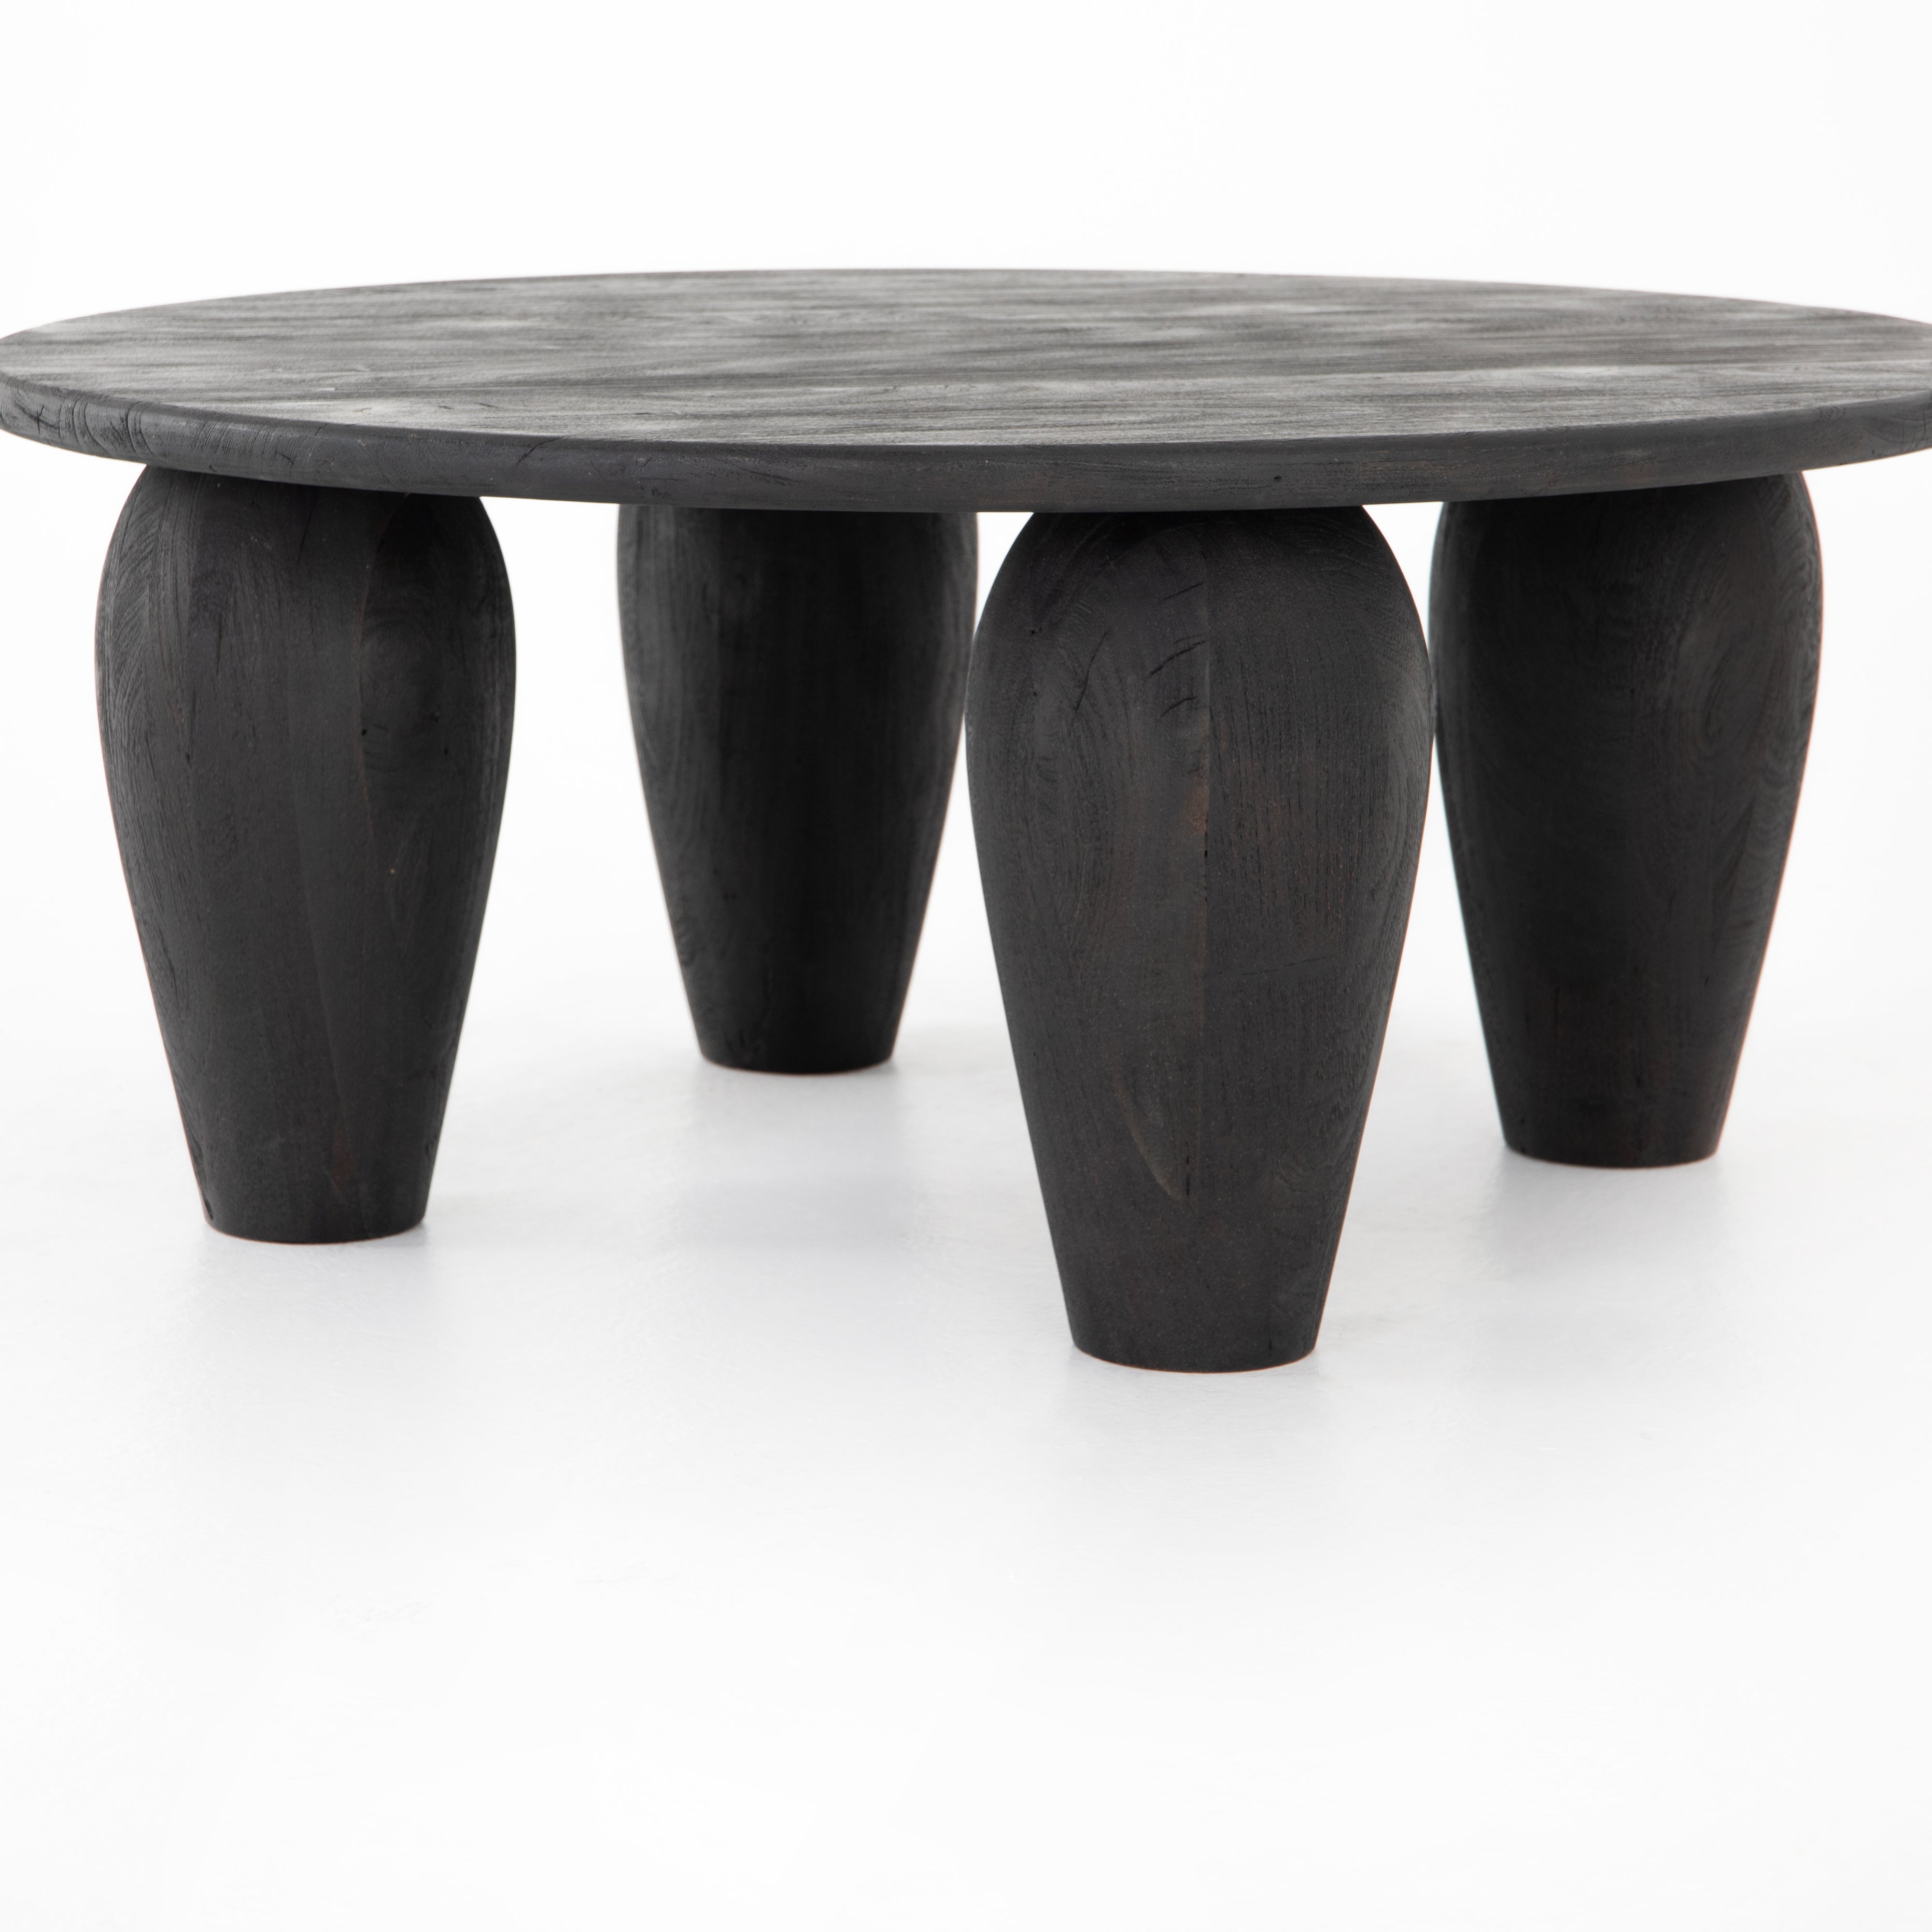 We love the shapely, substantial legs that support a slim, rounded tabletop of light black-finished reclaimed woods in this Maricopa Coffee Table - Dark Totem. A global, organic look with a handcrafted vibe.